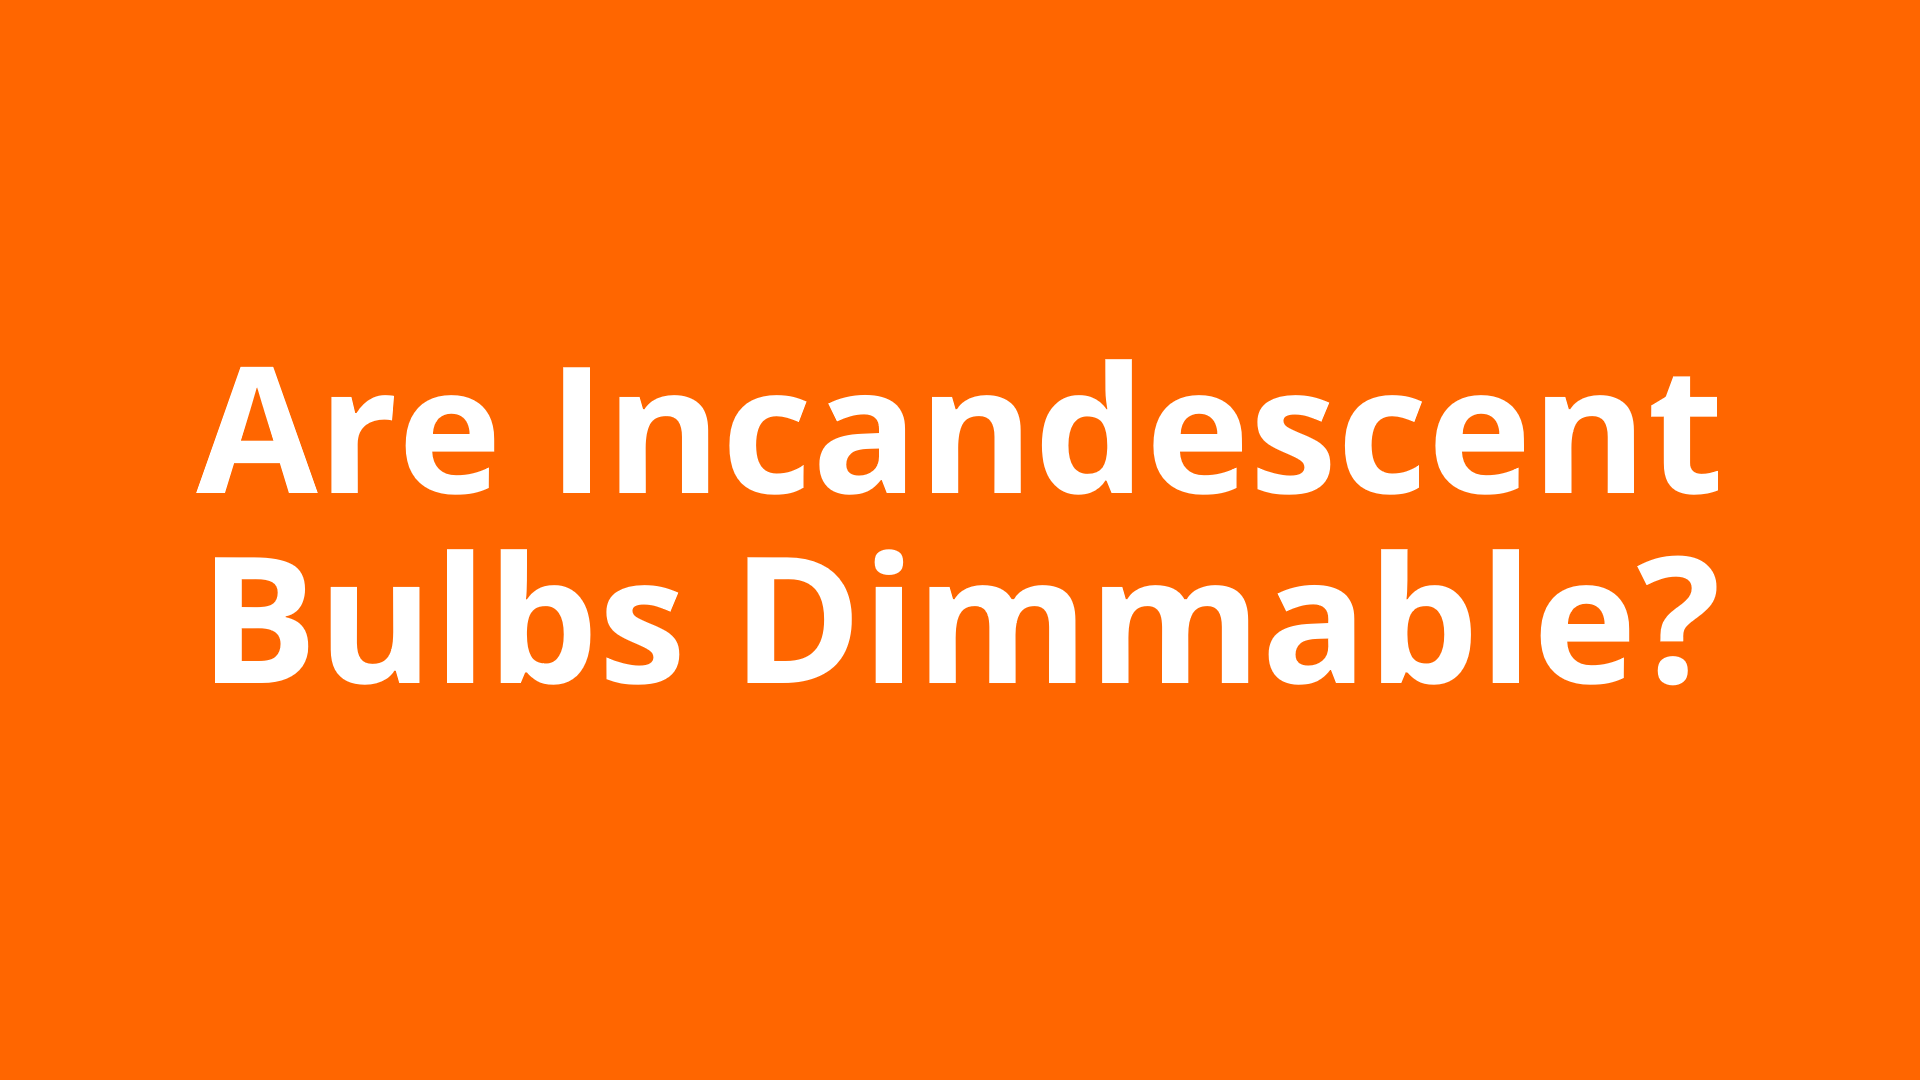 Are Incandescent Bulbs Dimmable?